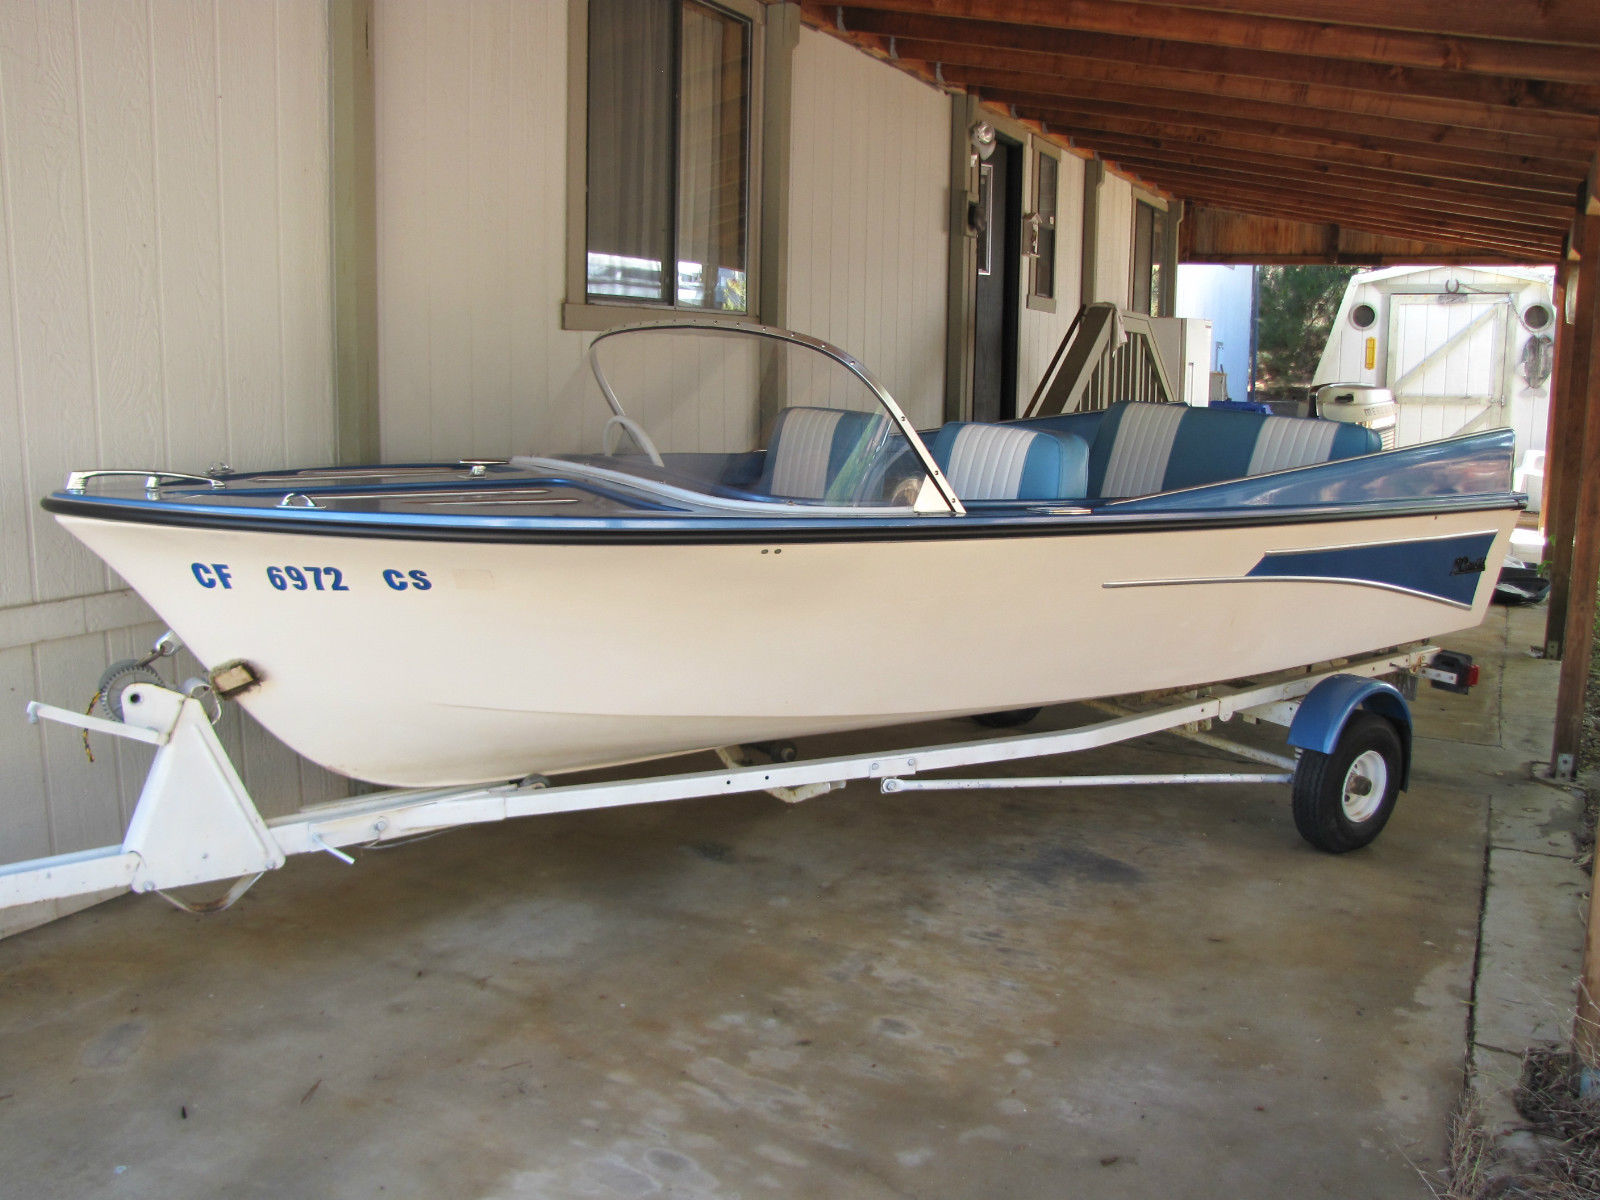 Oasis Runabout Sky Boat 1959 for sale for $6,500 - Boats ...